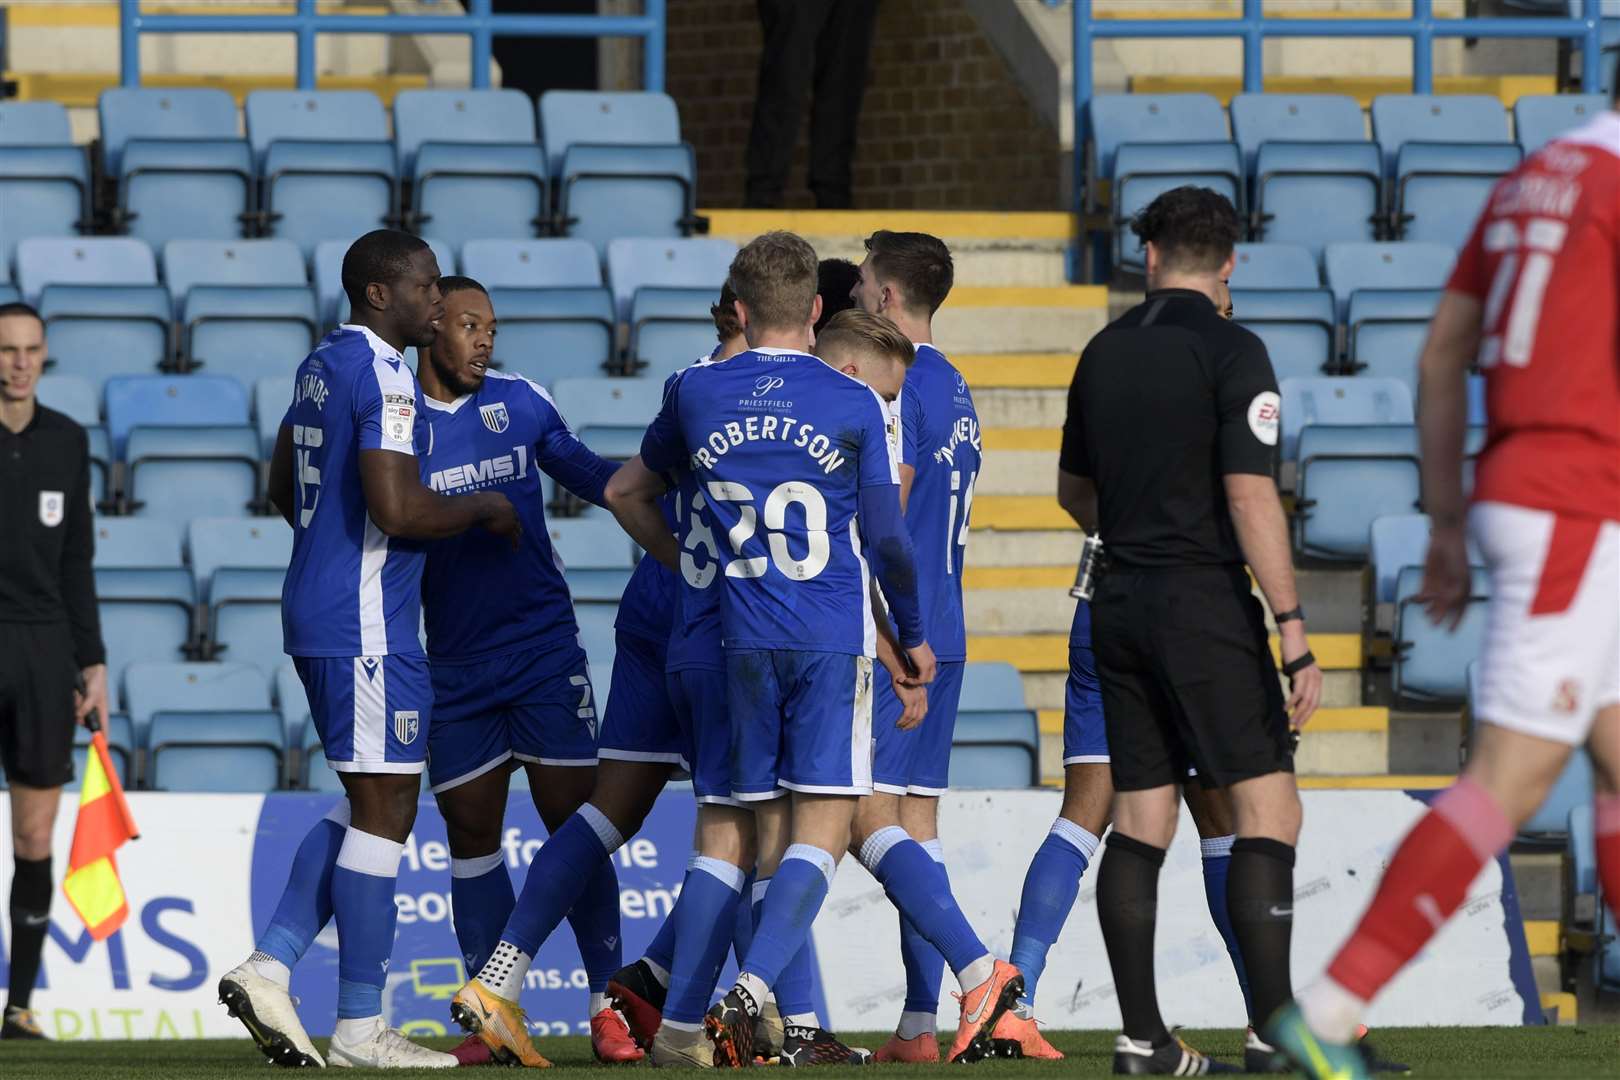 Gills players celebrate their opening goal Picture: Barry Goodwin